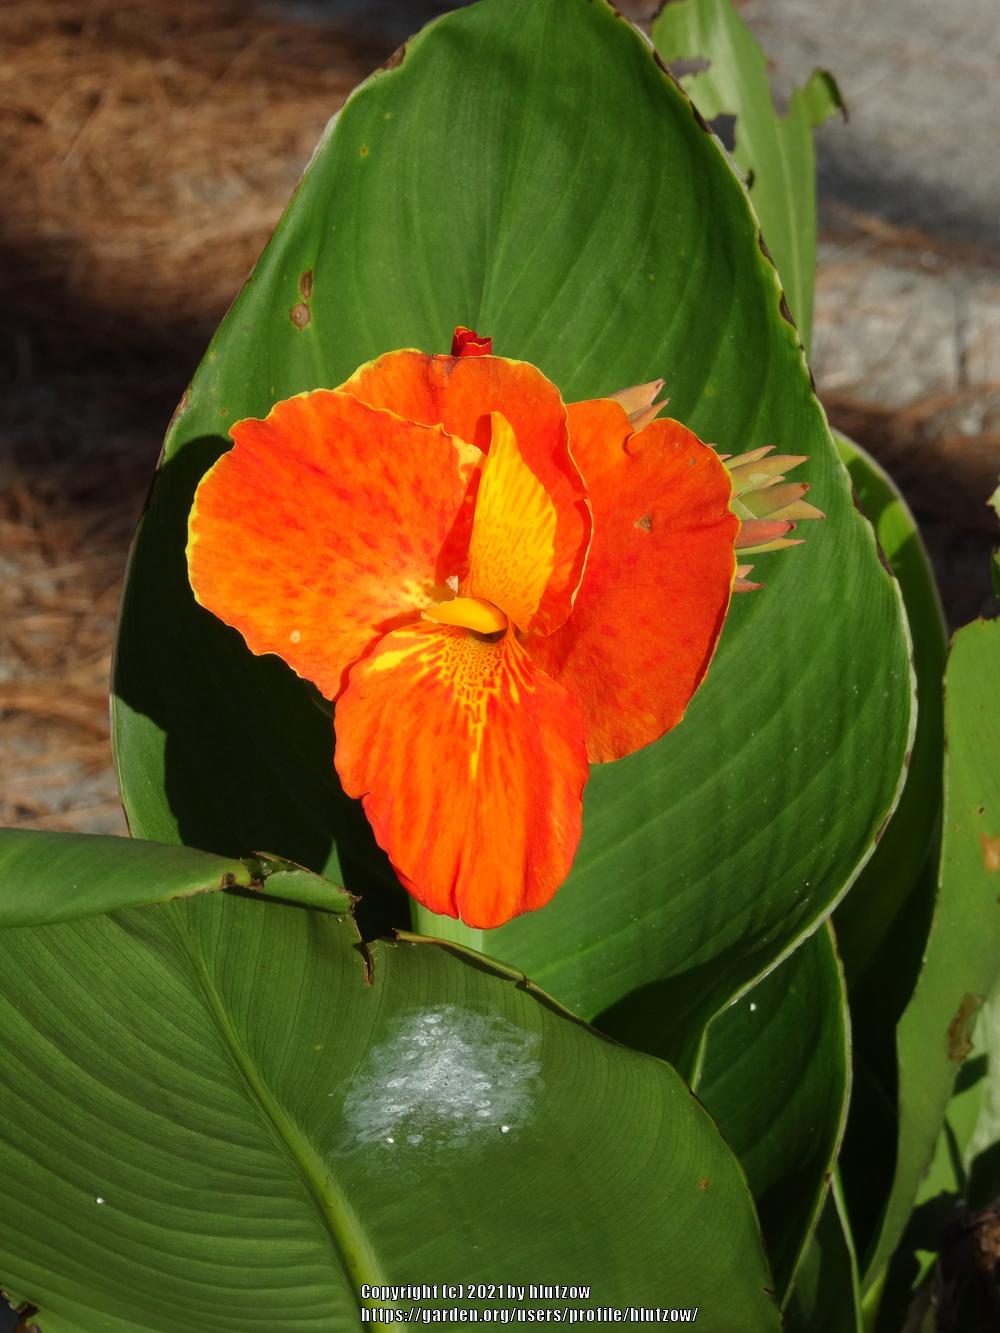 Photo of Cannas (Canna) uploaded by hlutzow